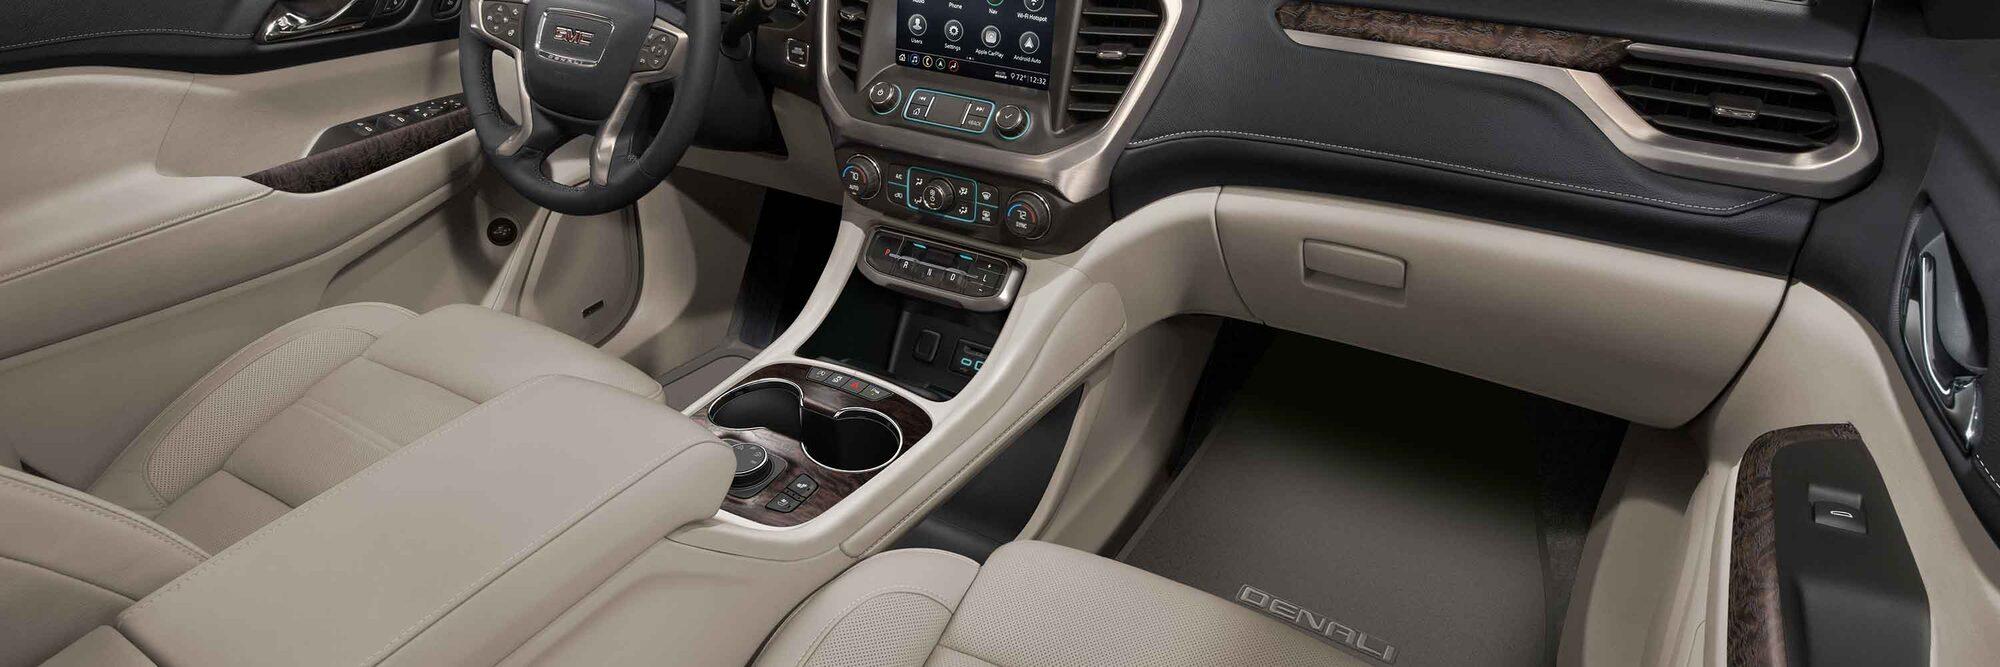 Available heated and ventilated† front seats and available heated steering wheel help make sure you stay at your perfect temperature.